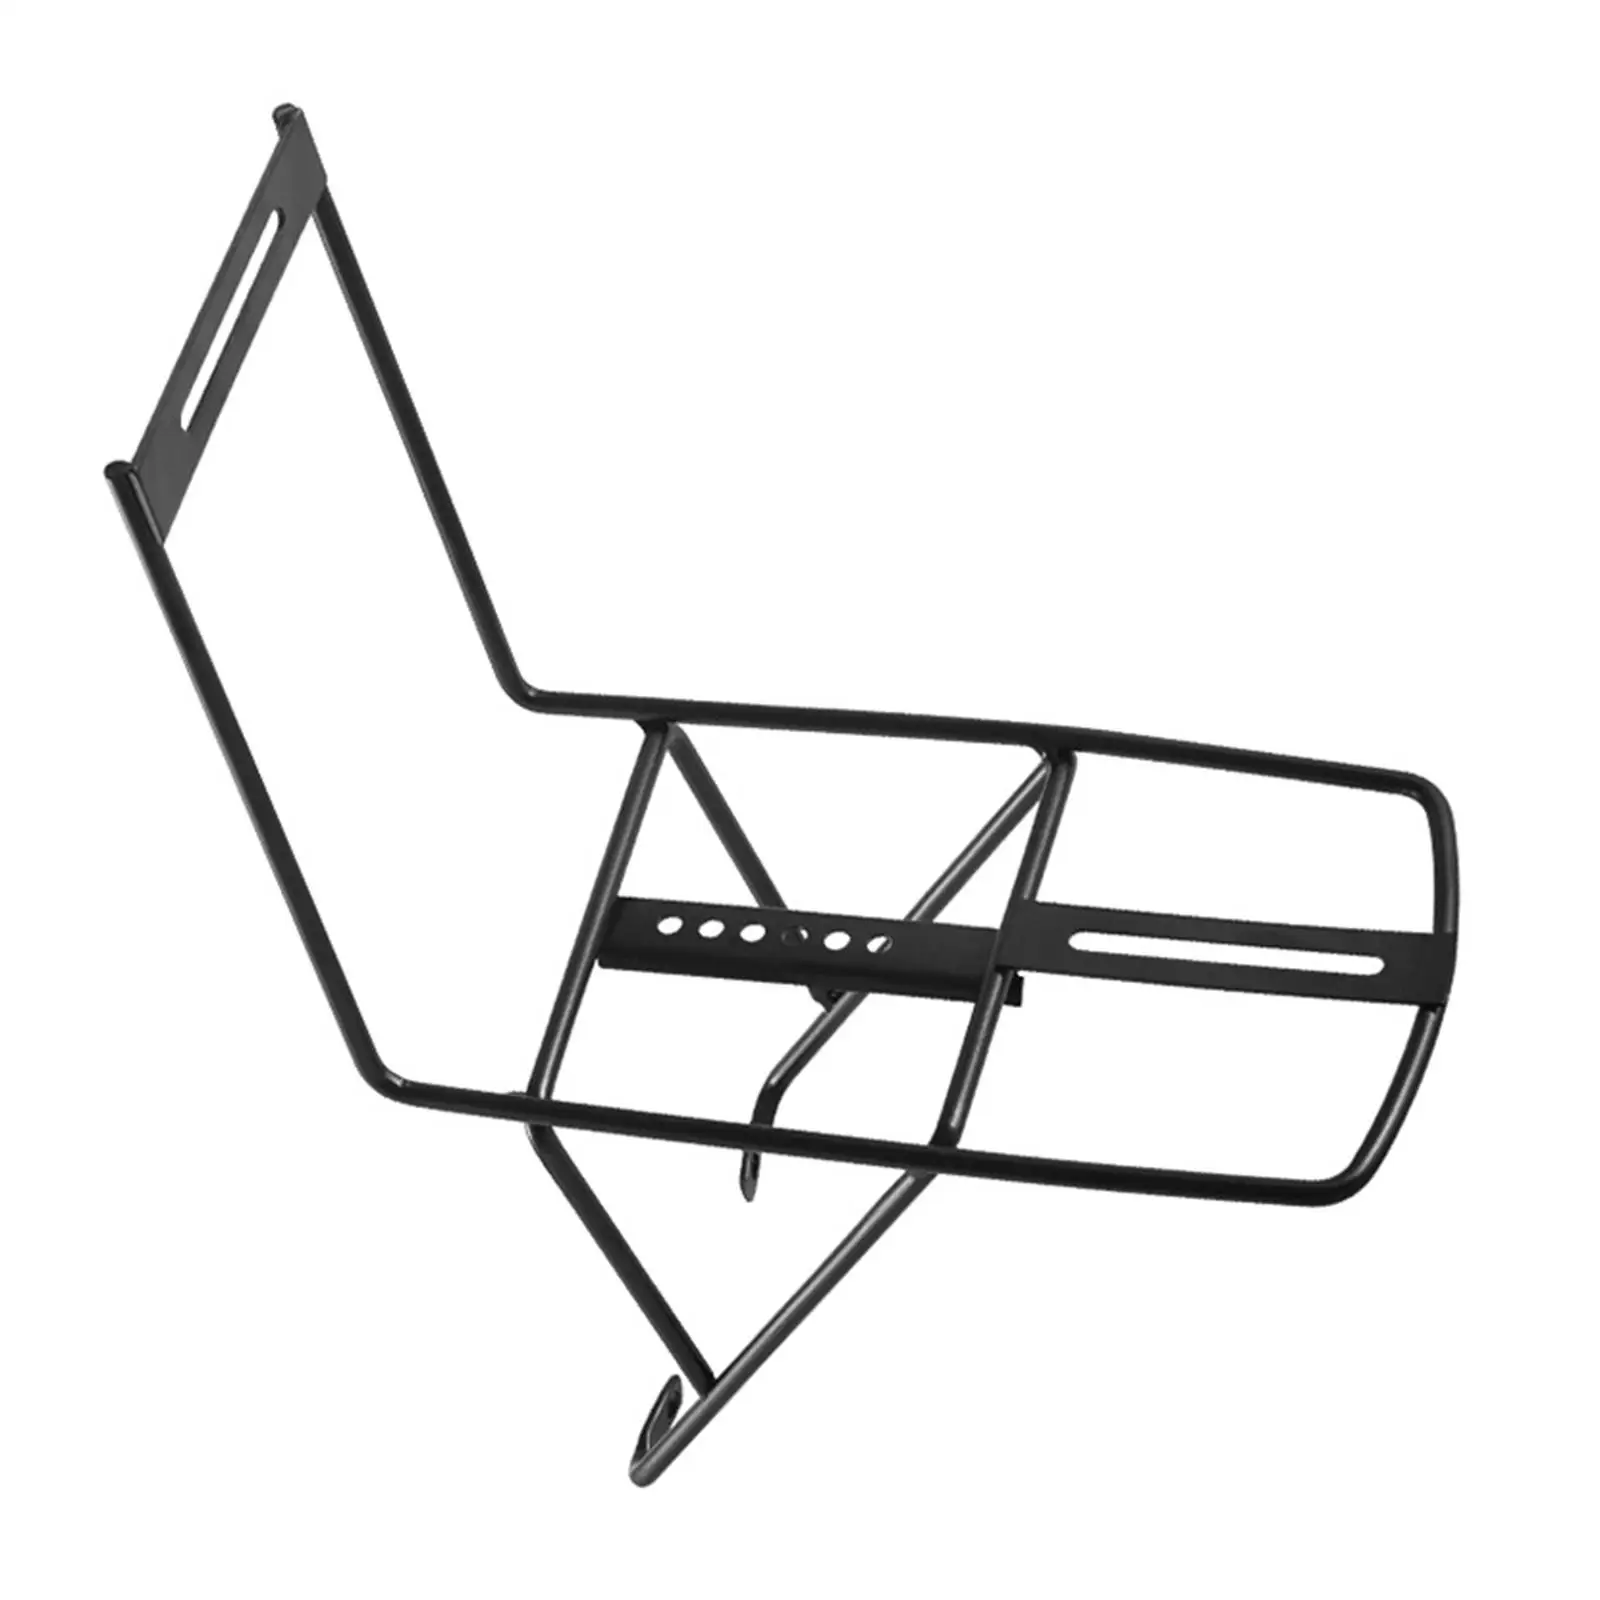 Bike Front Carrier Rack Carrying Accessories Bicycle Front Fork Rack Cargo Pannier for Road Bike Cycling Touring Riding Travel